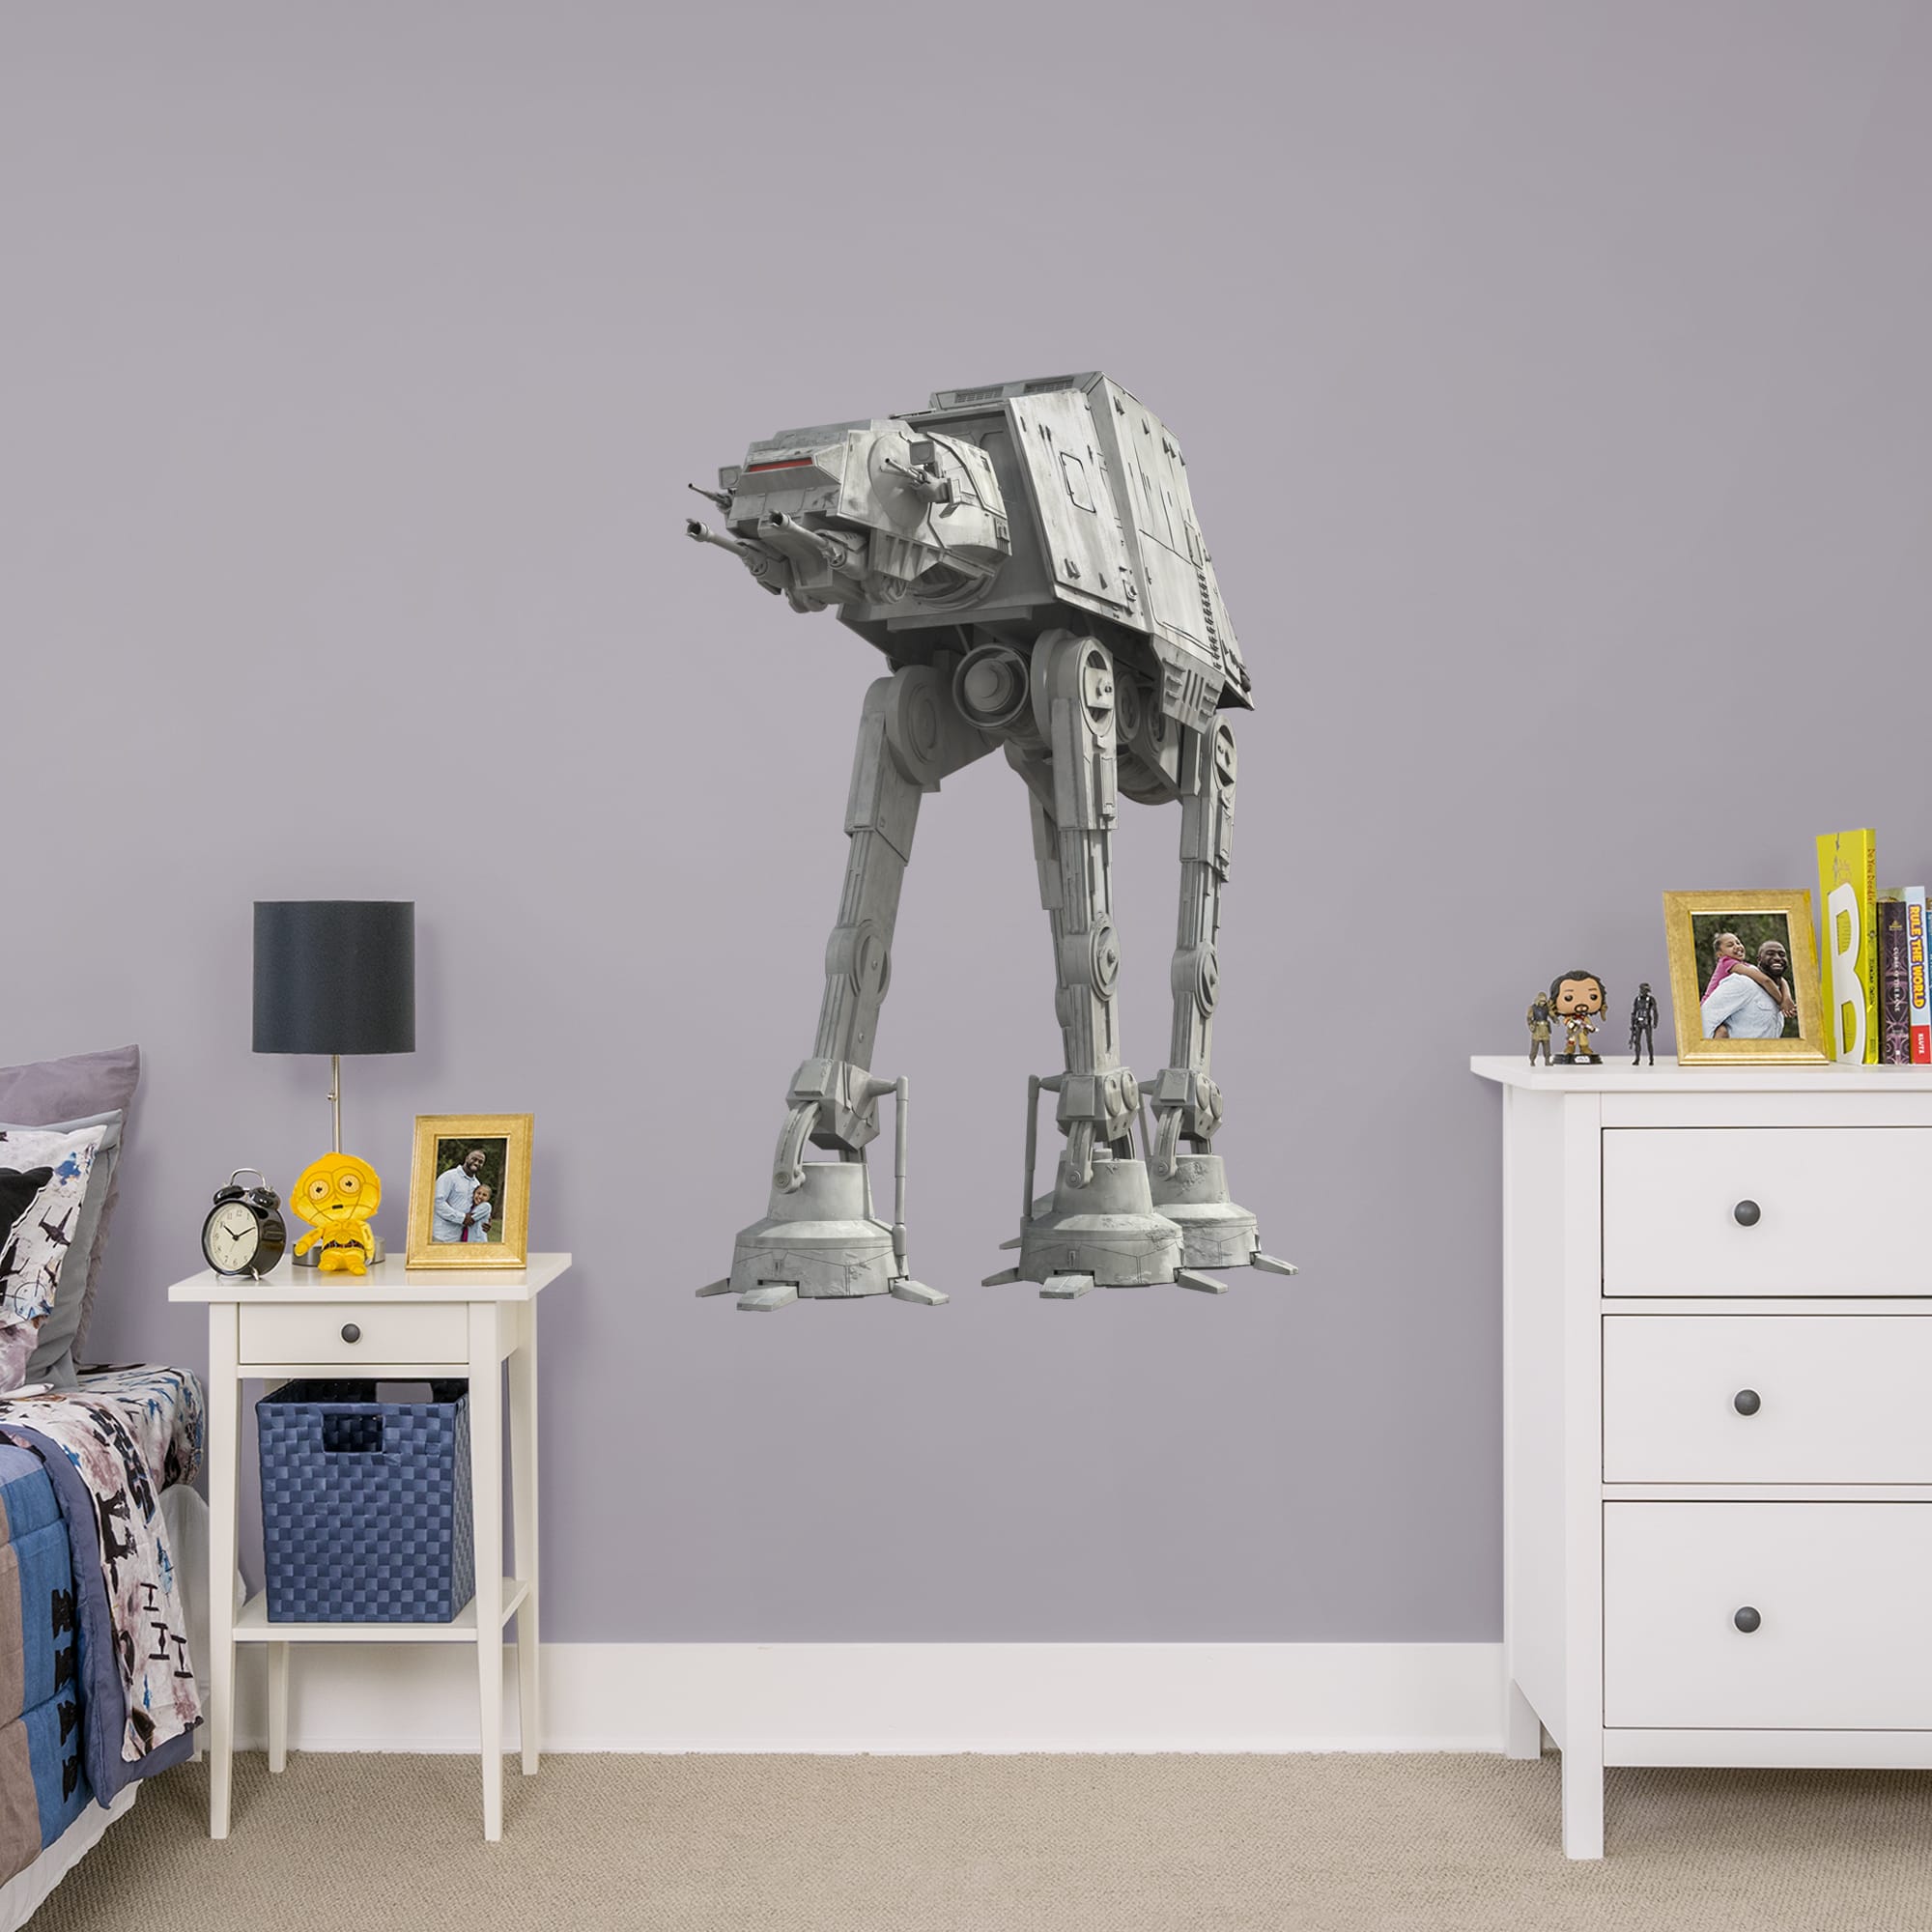 AT-AT - Officially Licensed Removable Wall Decal Giant Ship + 1 Decal (33"W x 51"H) by Fathead | Vinyl